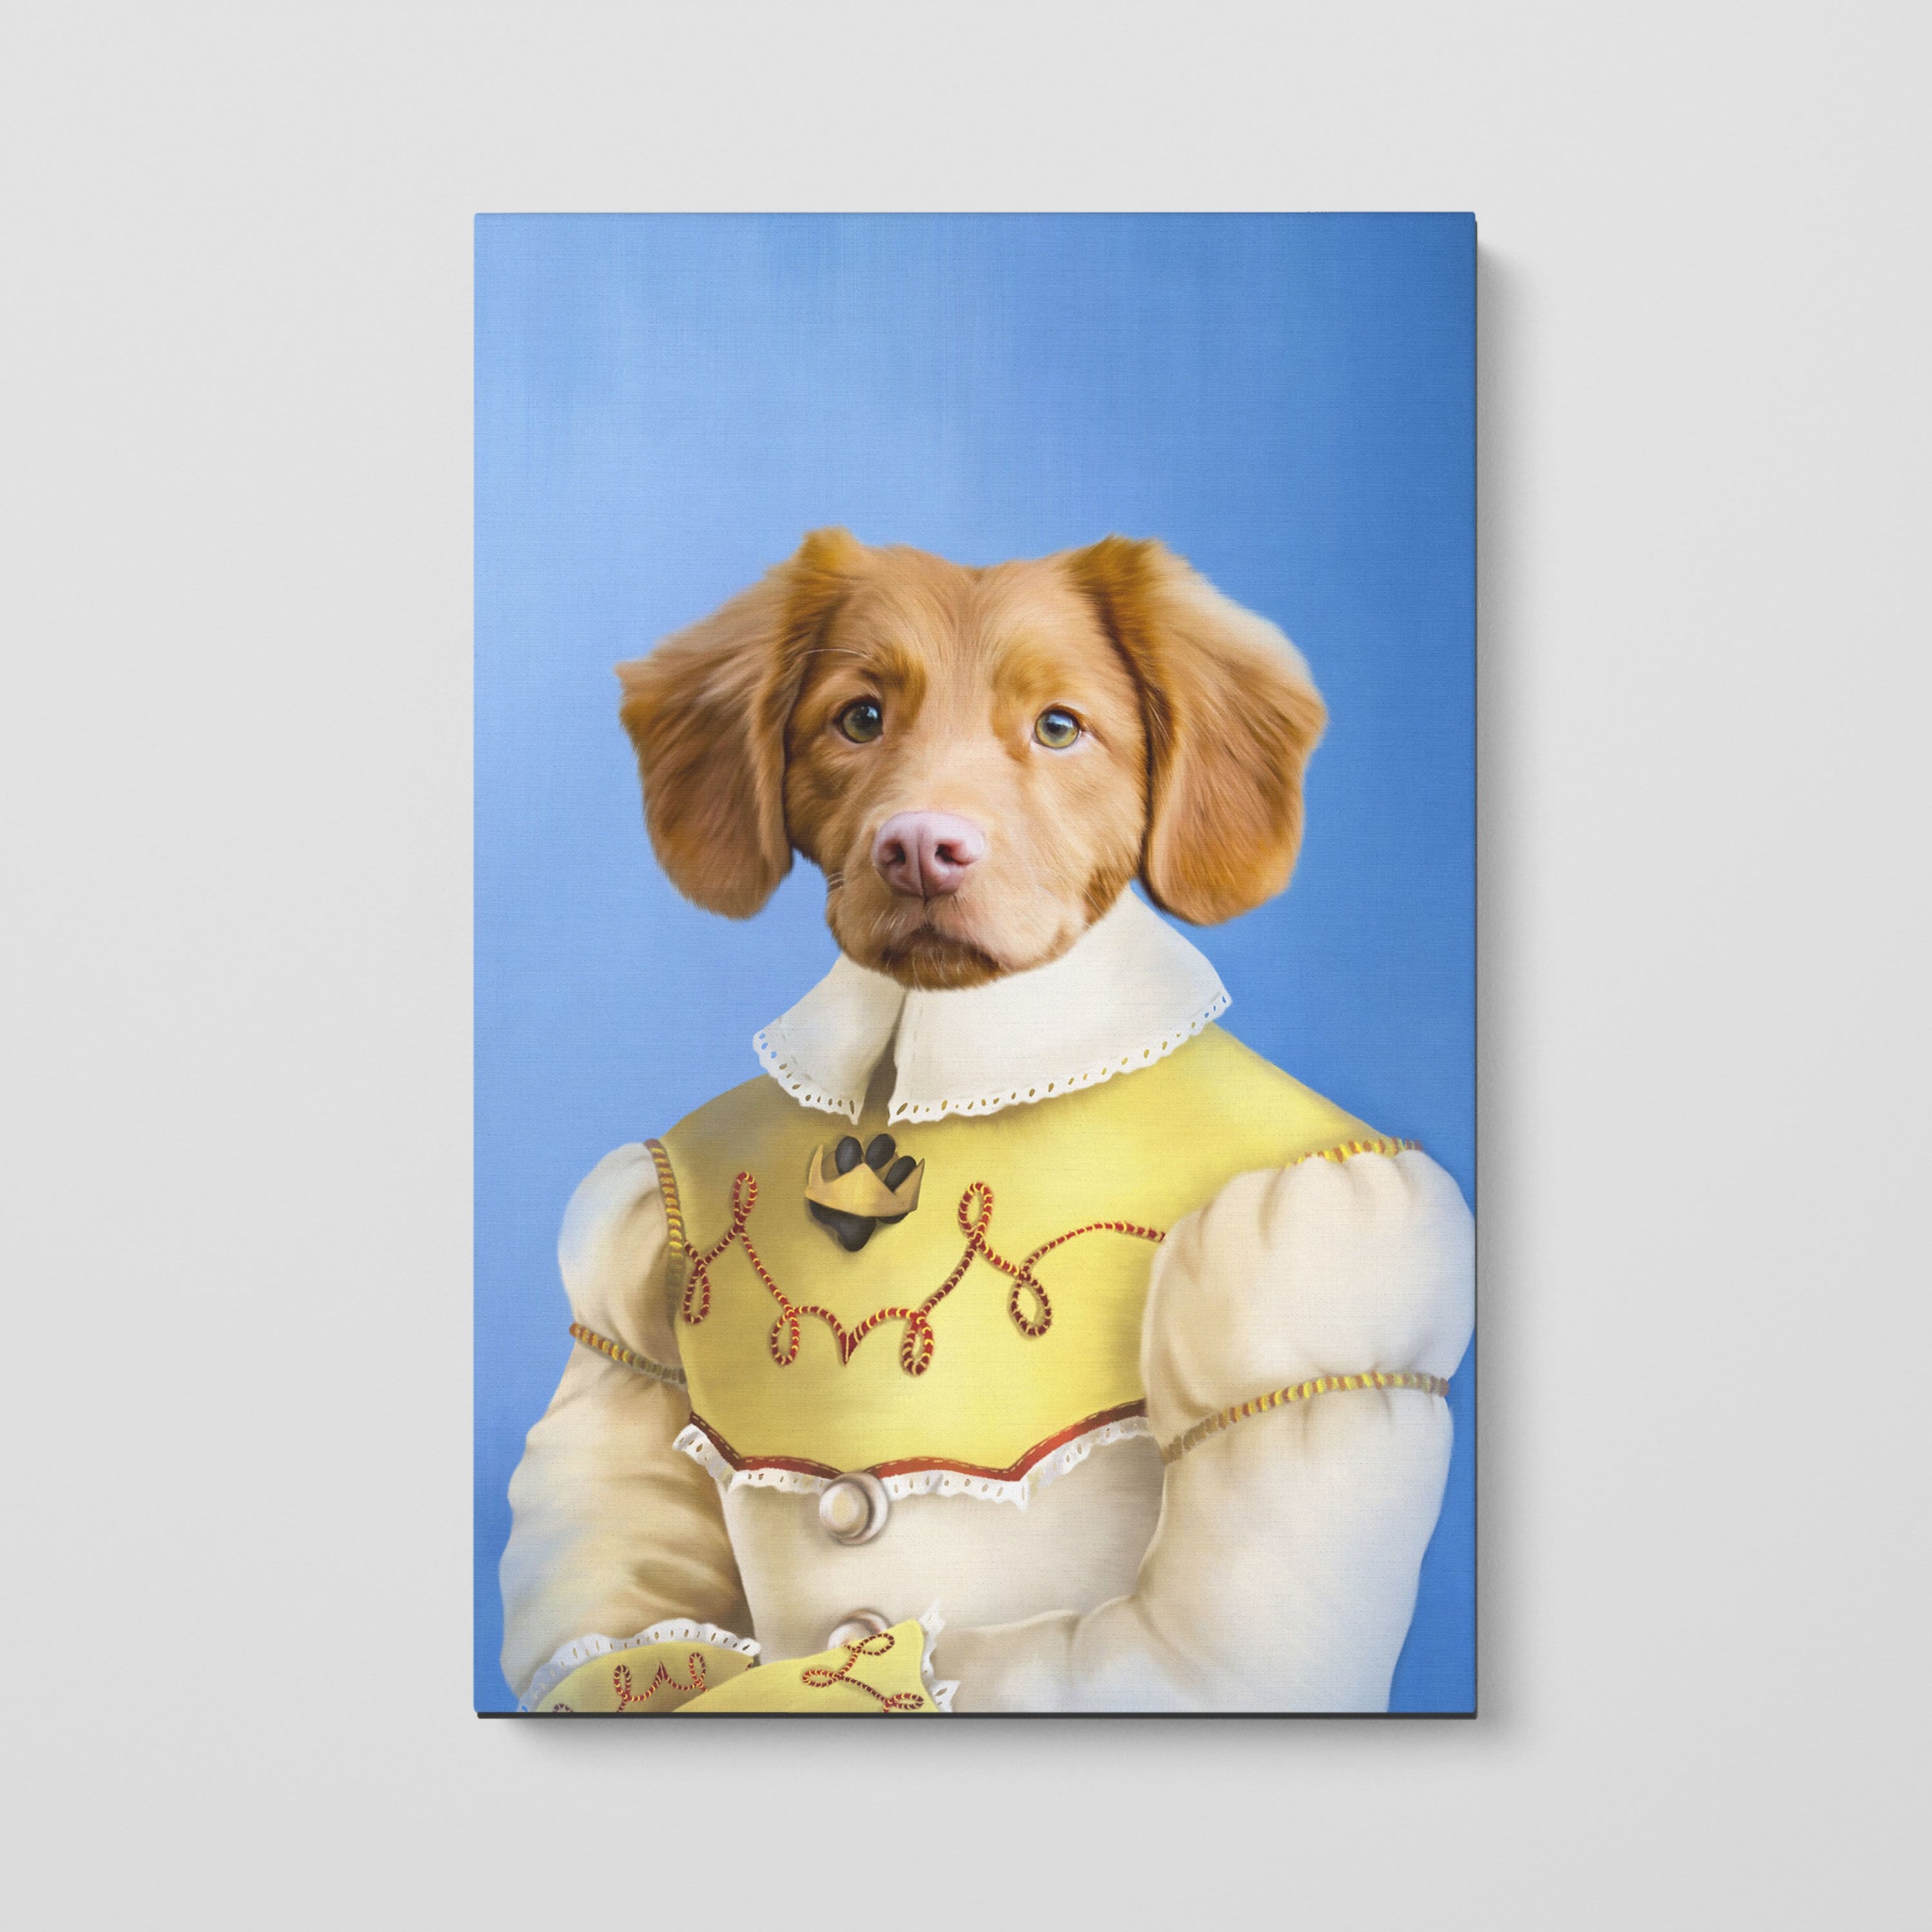 The Southern Belle - Custom Pet Canvas